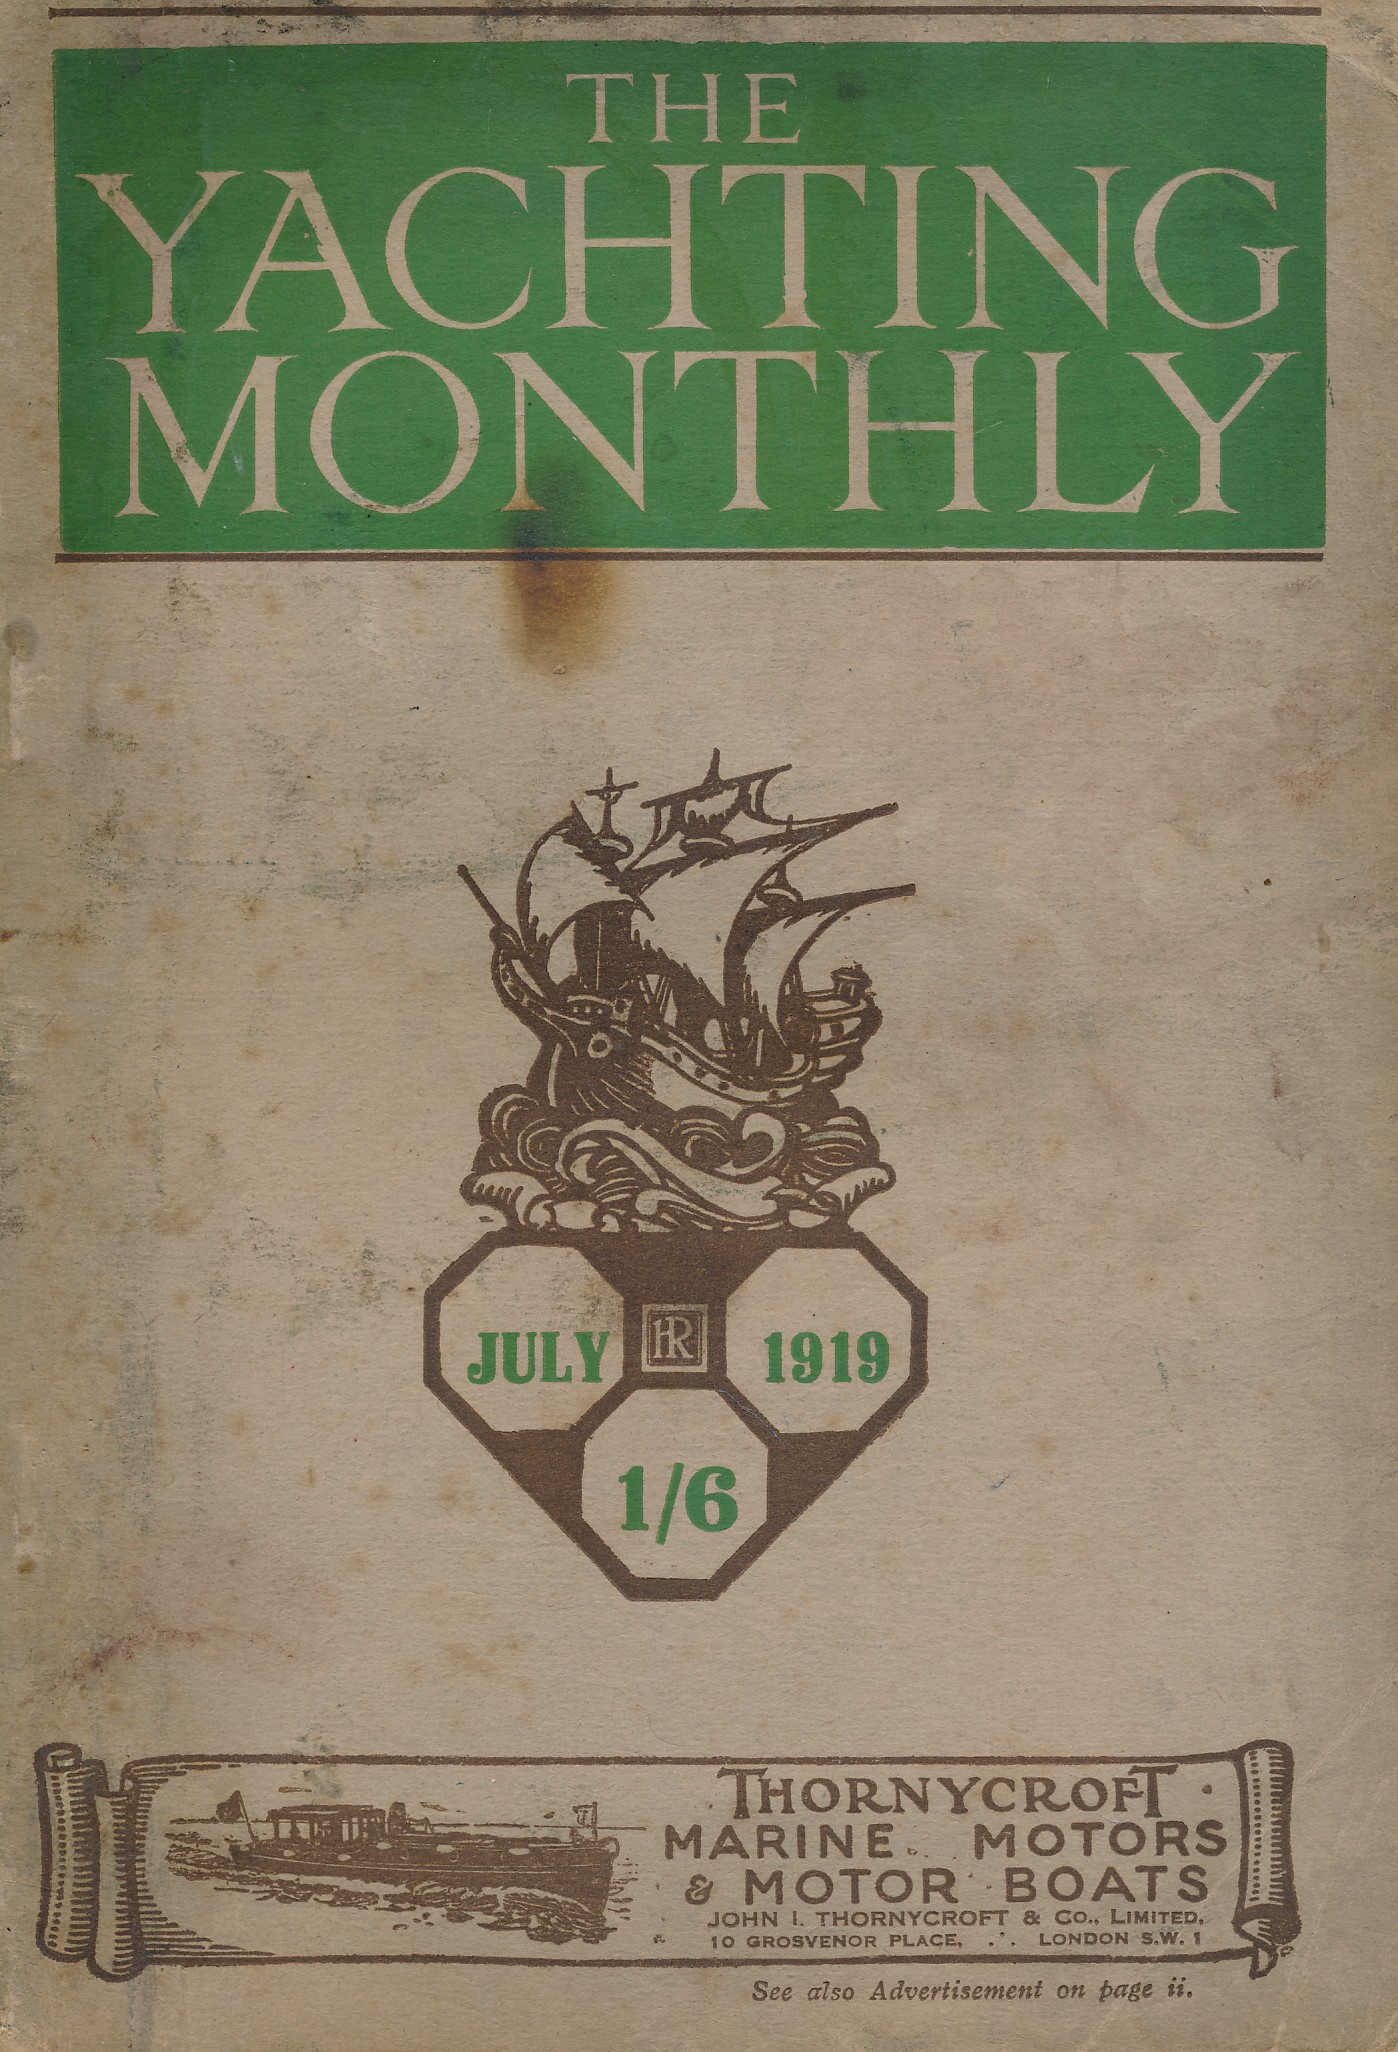 The Yachting Monthly and Magazine of the R.N.V.R.  Volume 159.- Vol. XXVII.  July, 1919.